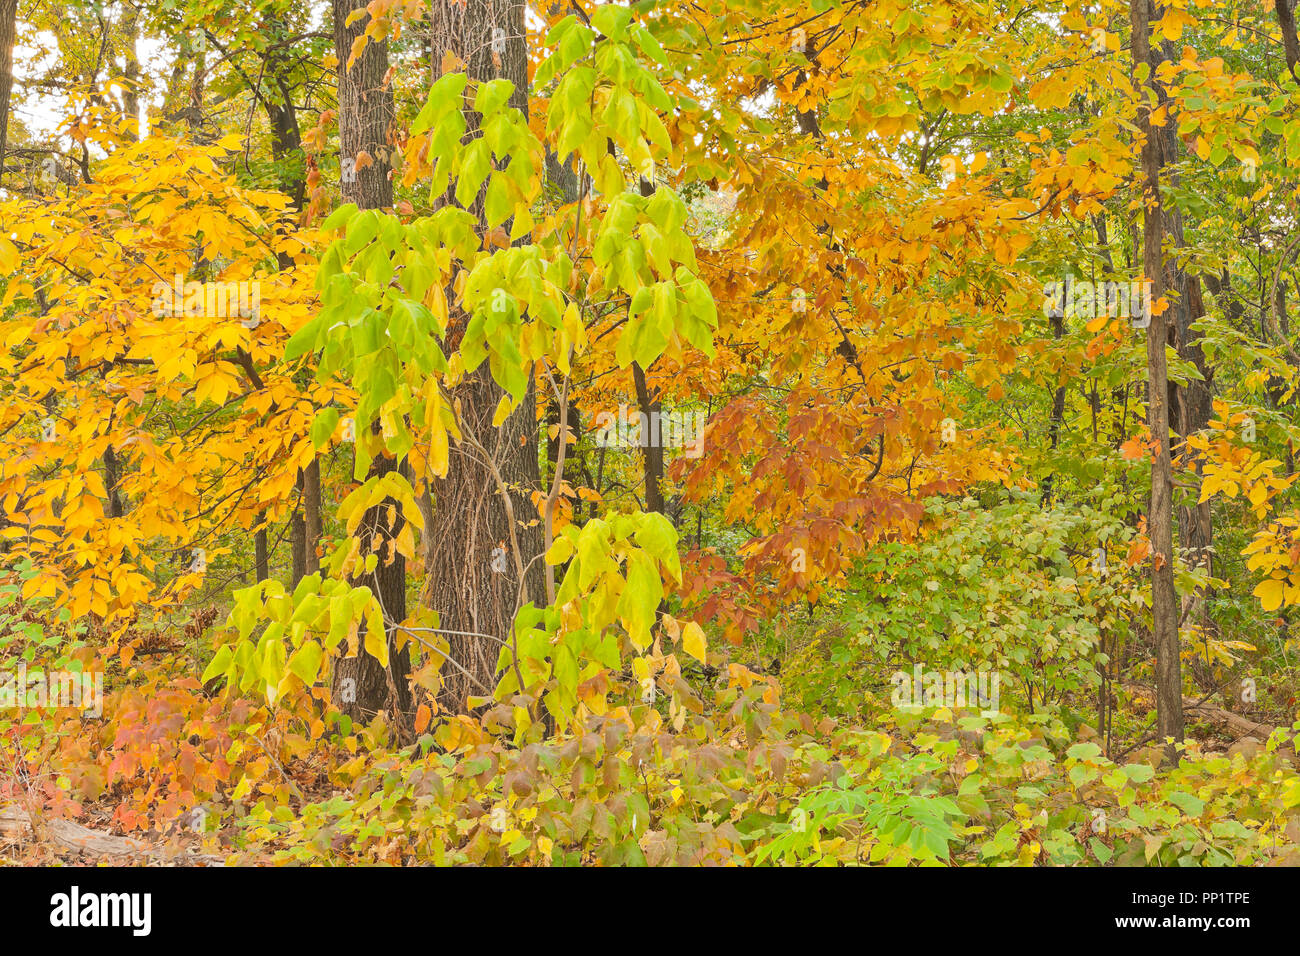 Poison ivy in the undergrowth keeps us out, but we can still enjoy the view. Autumn foliage at St. Louis Forest Park in October. Stock Photo